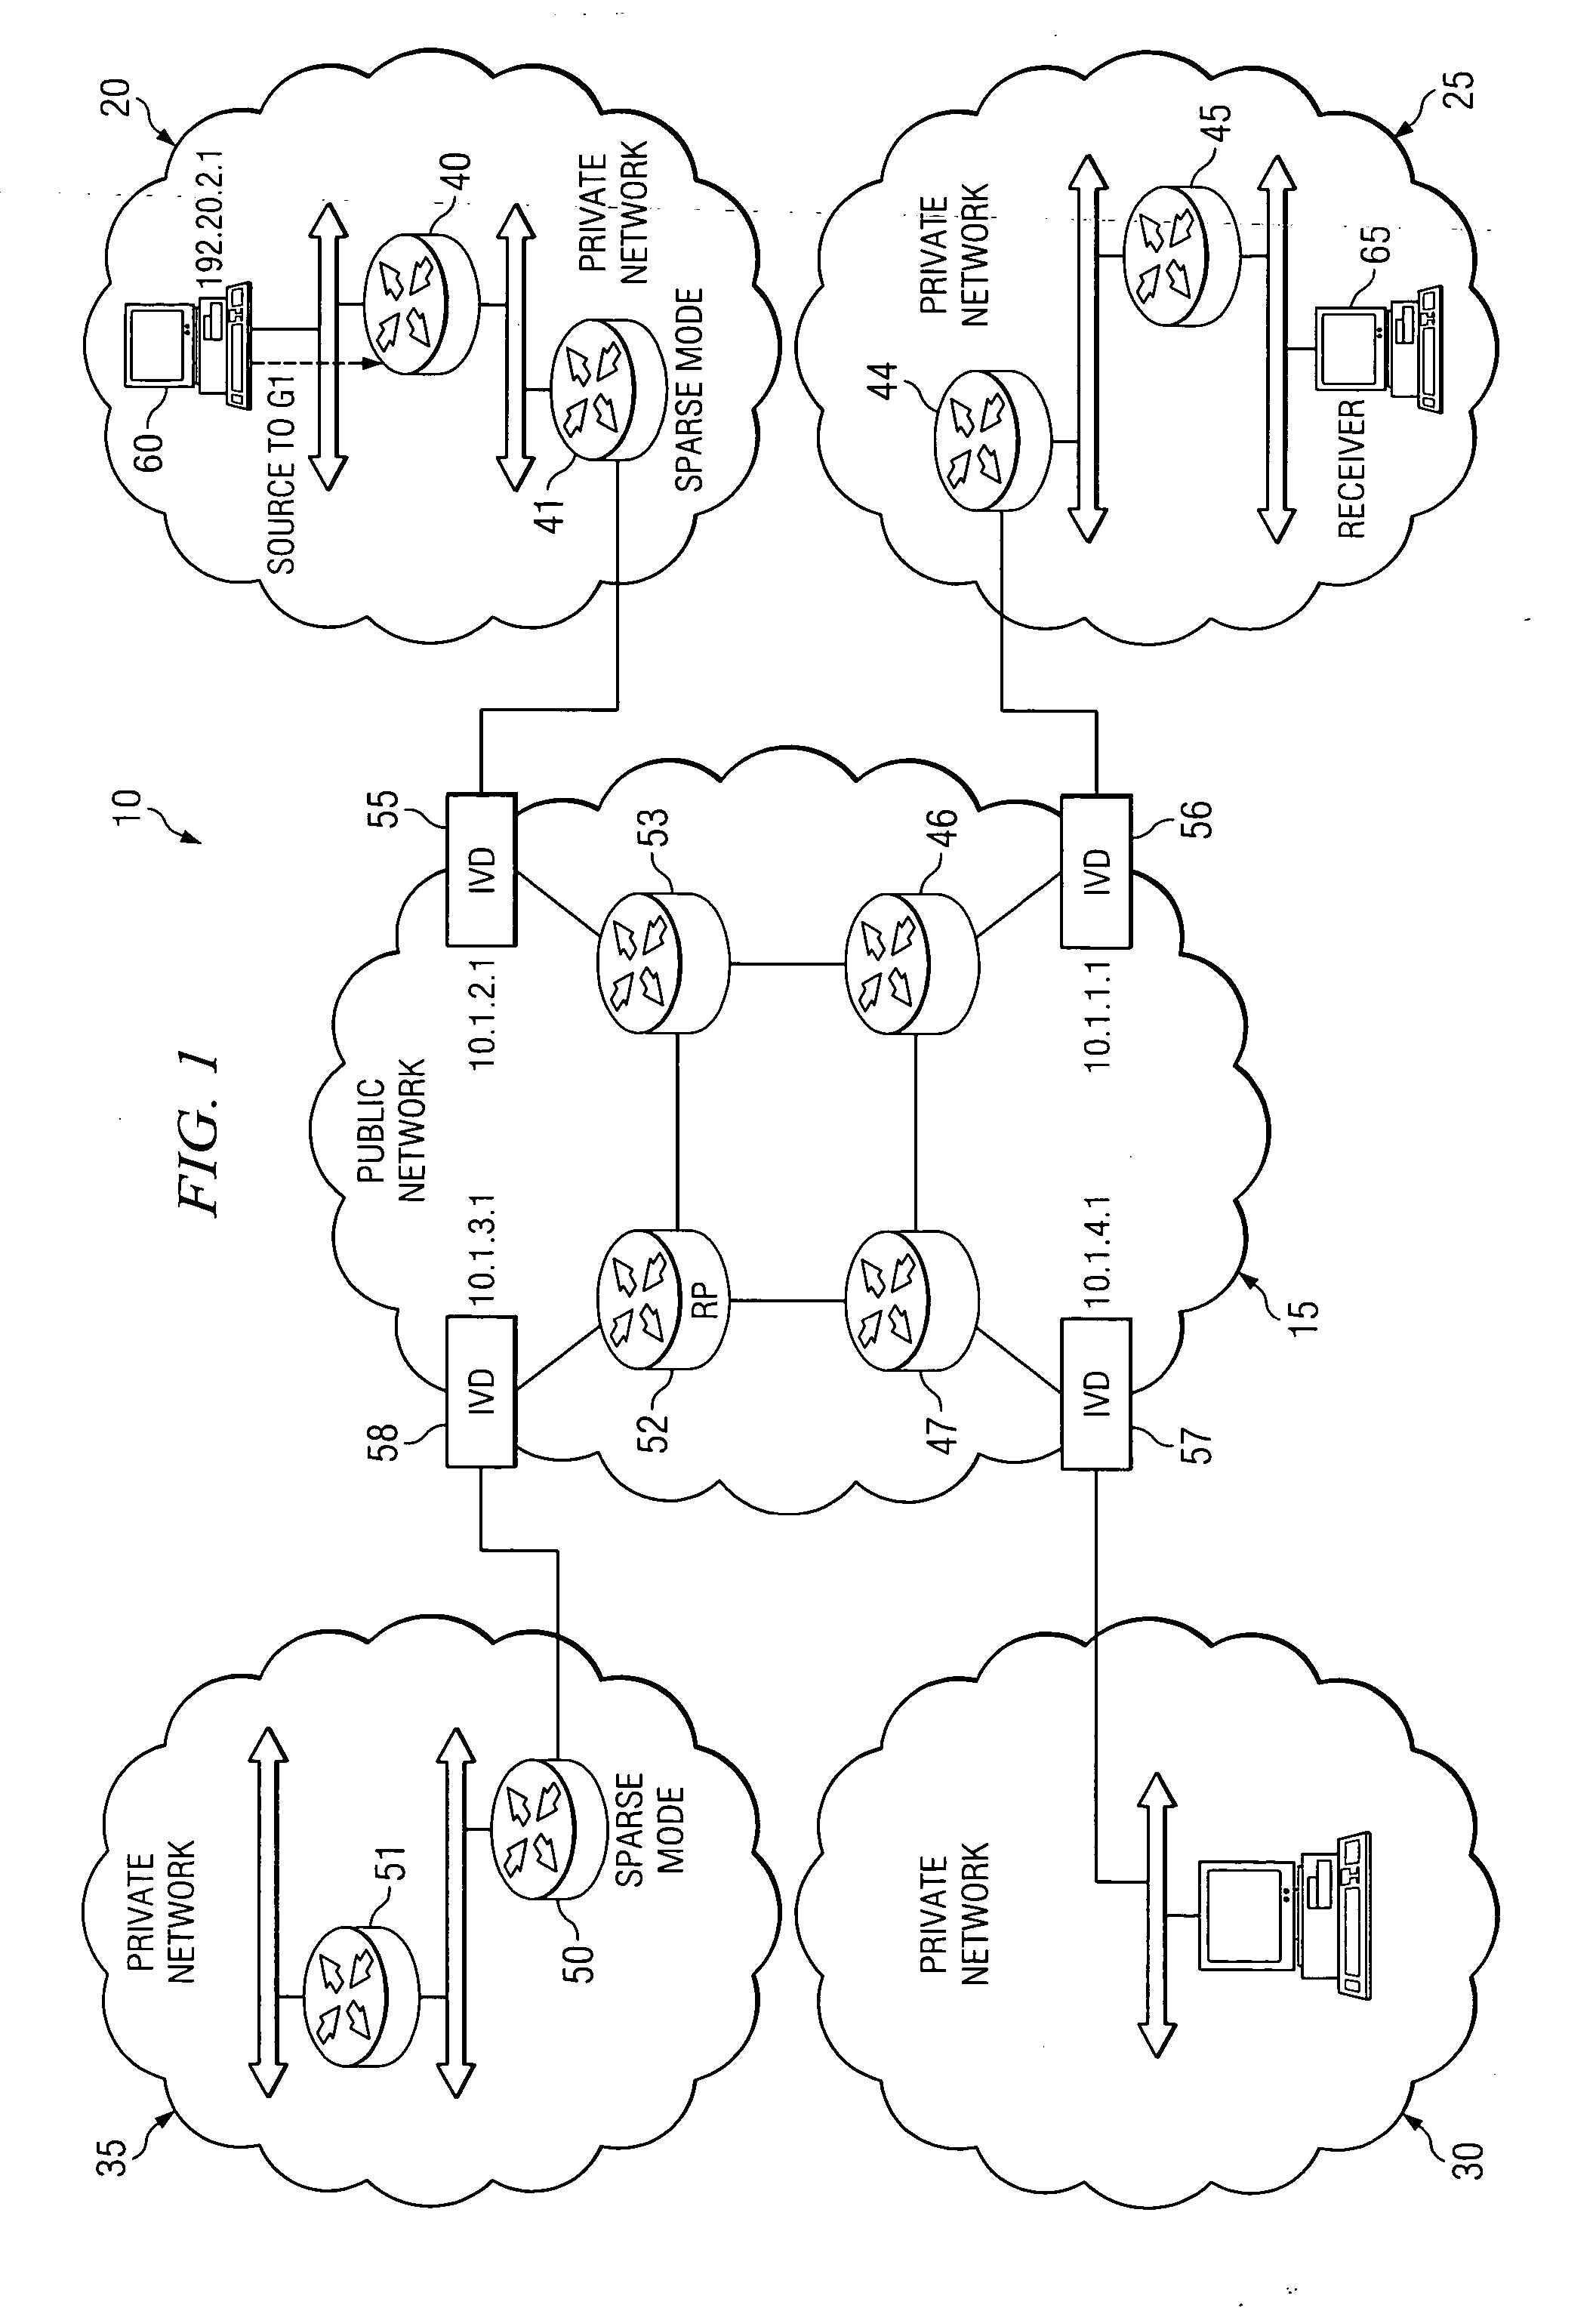 System and method for providing packet proxy services across virtual private networks